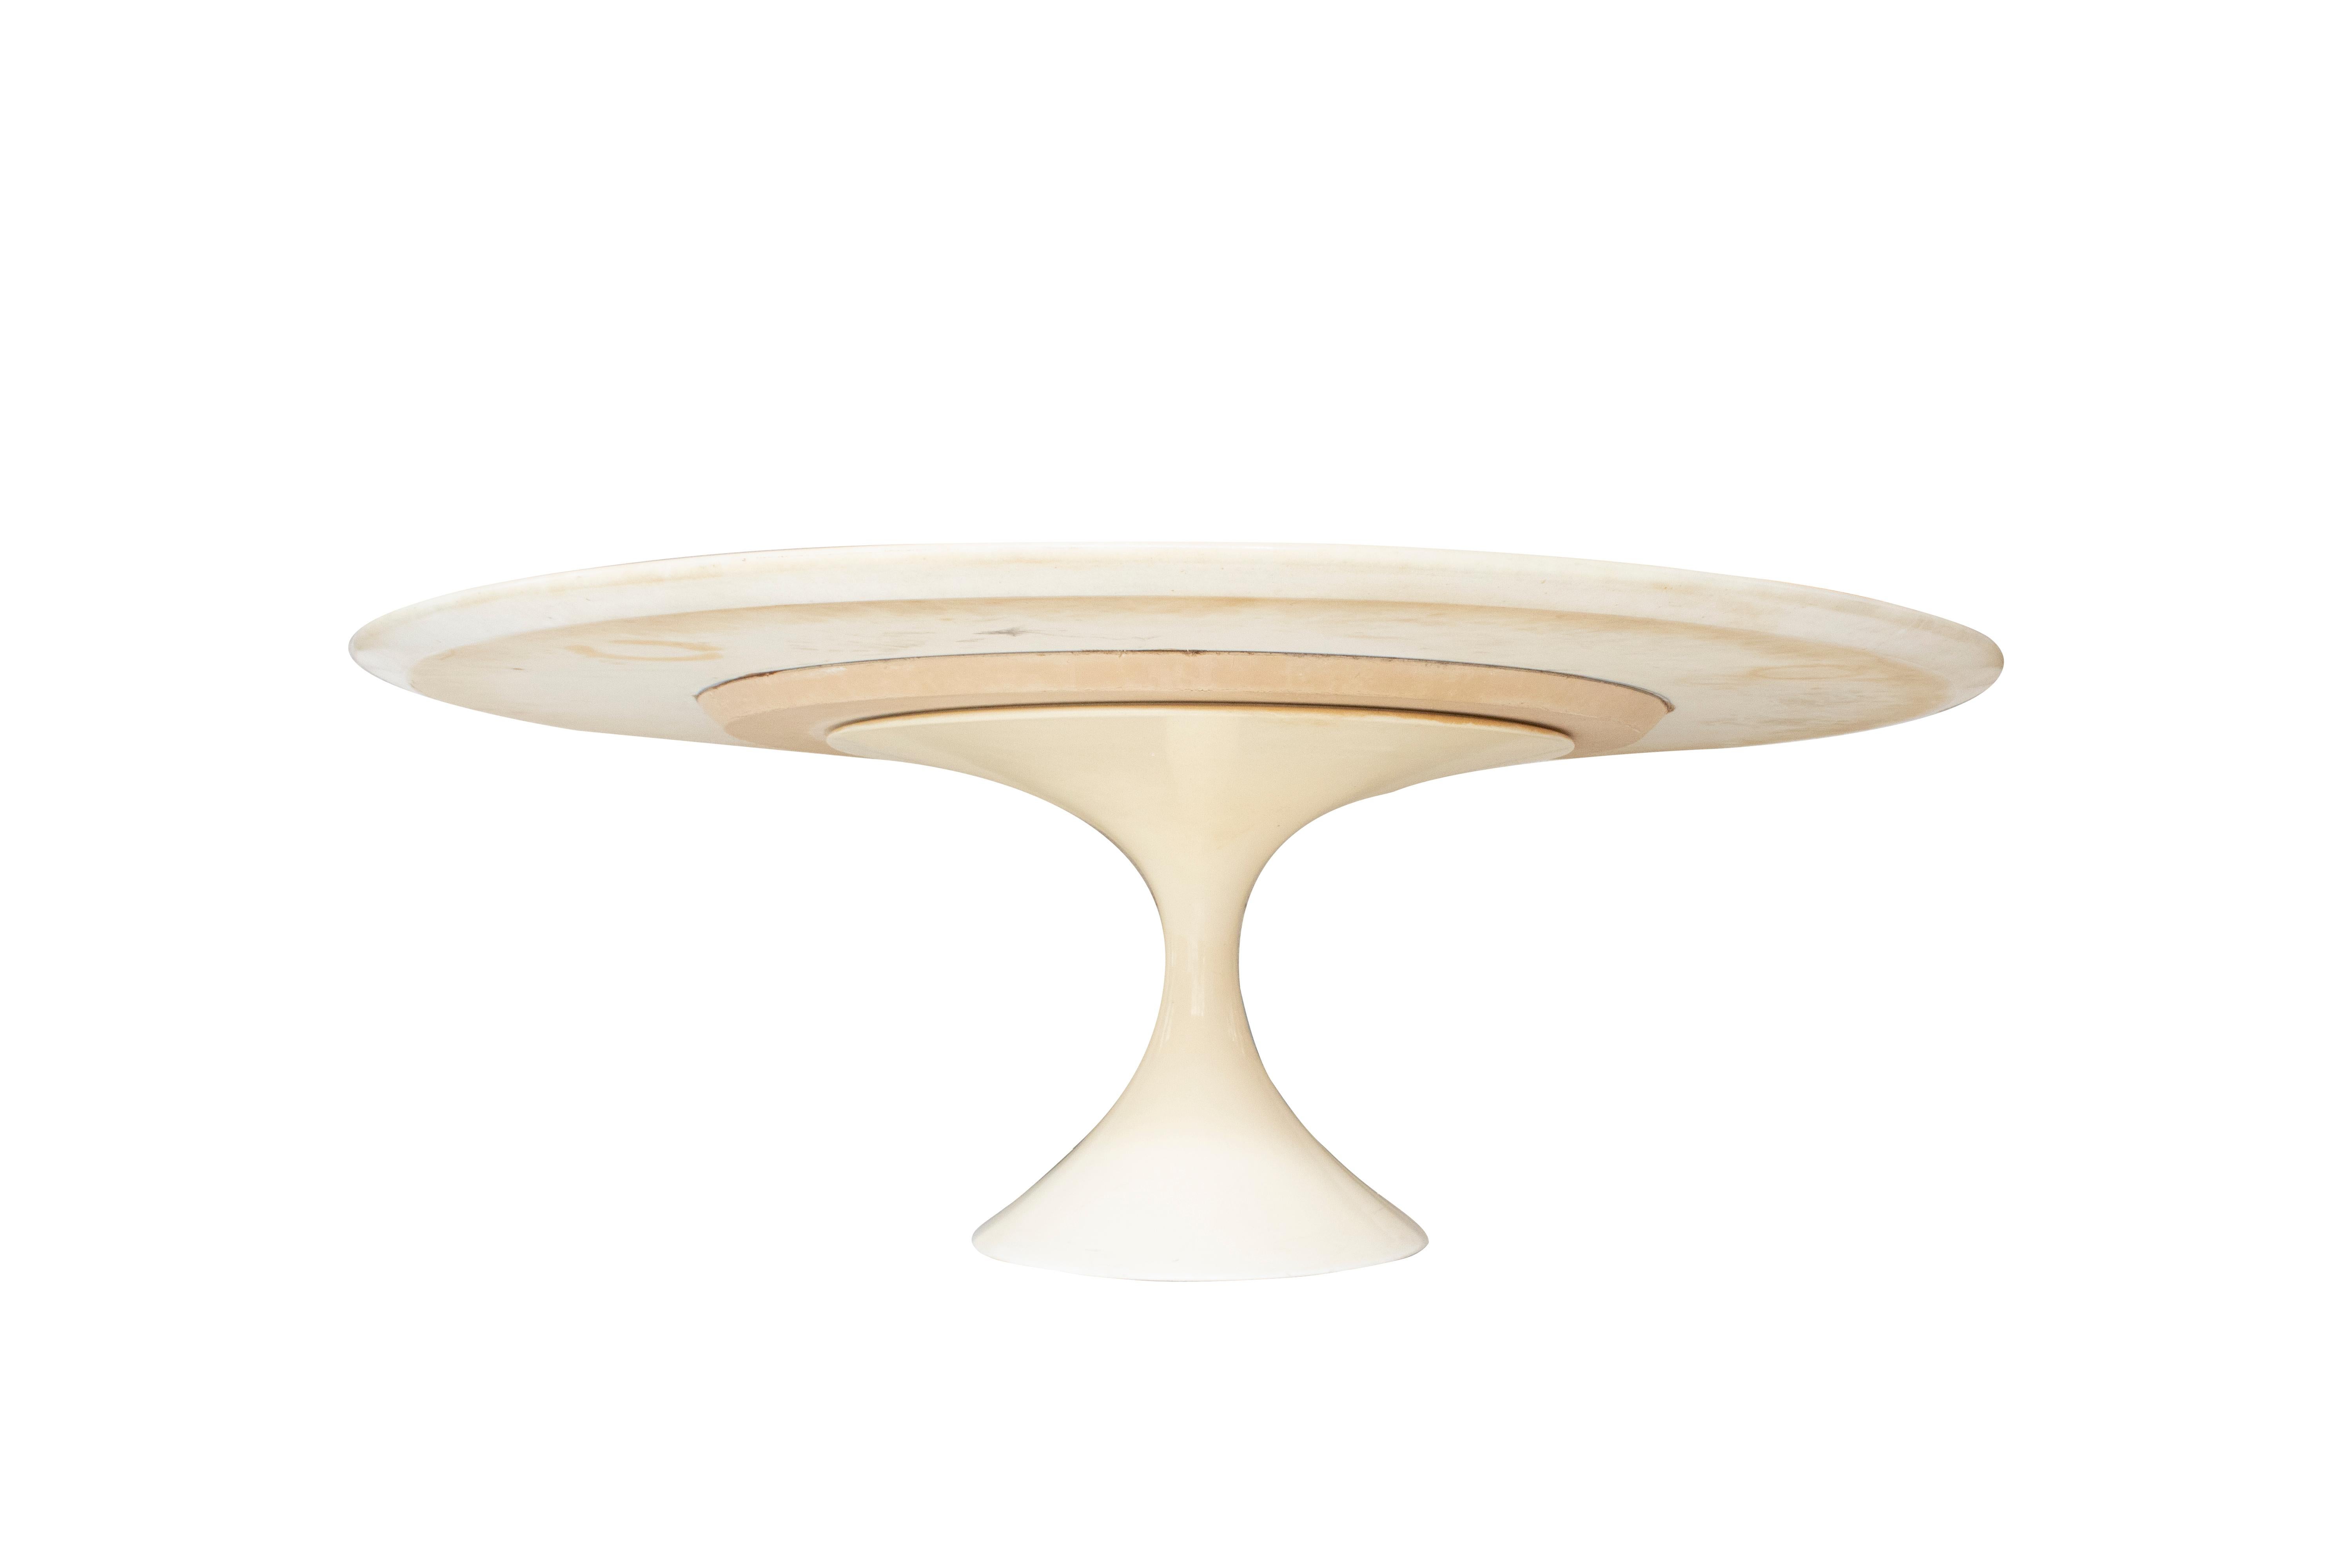 Italian Tulip-inspired center table, made of a white lacquered iron base, and a rounded white marble tabletop.